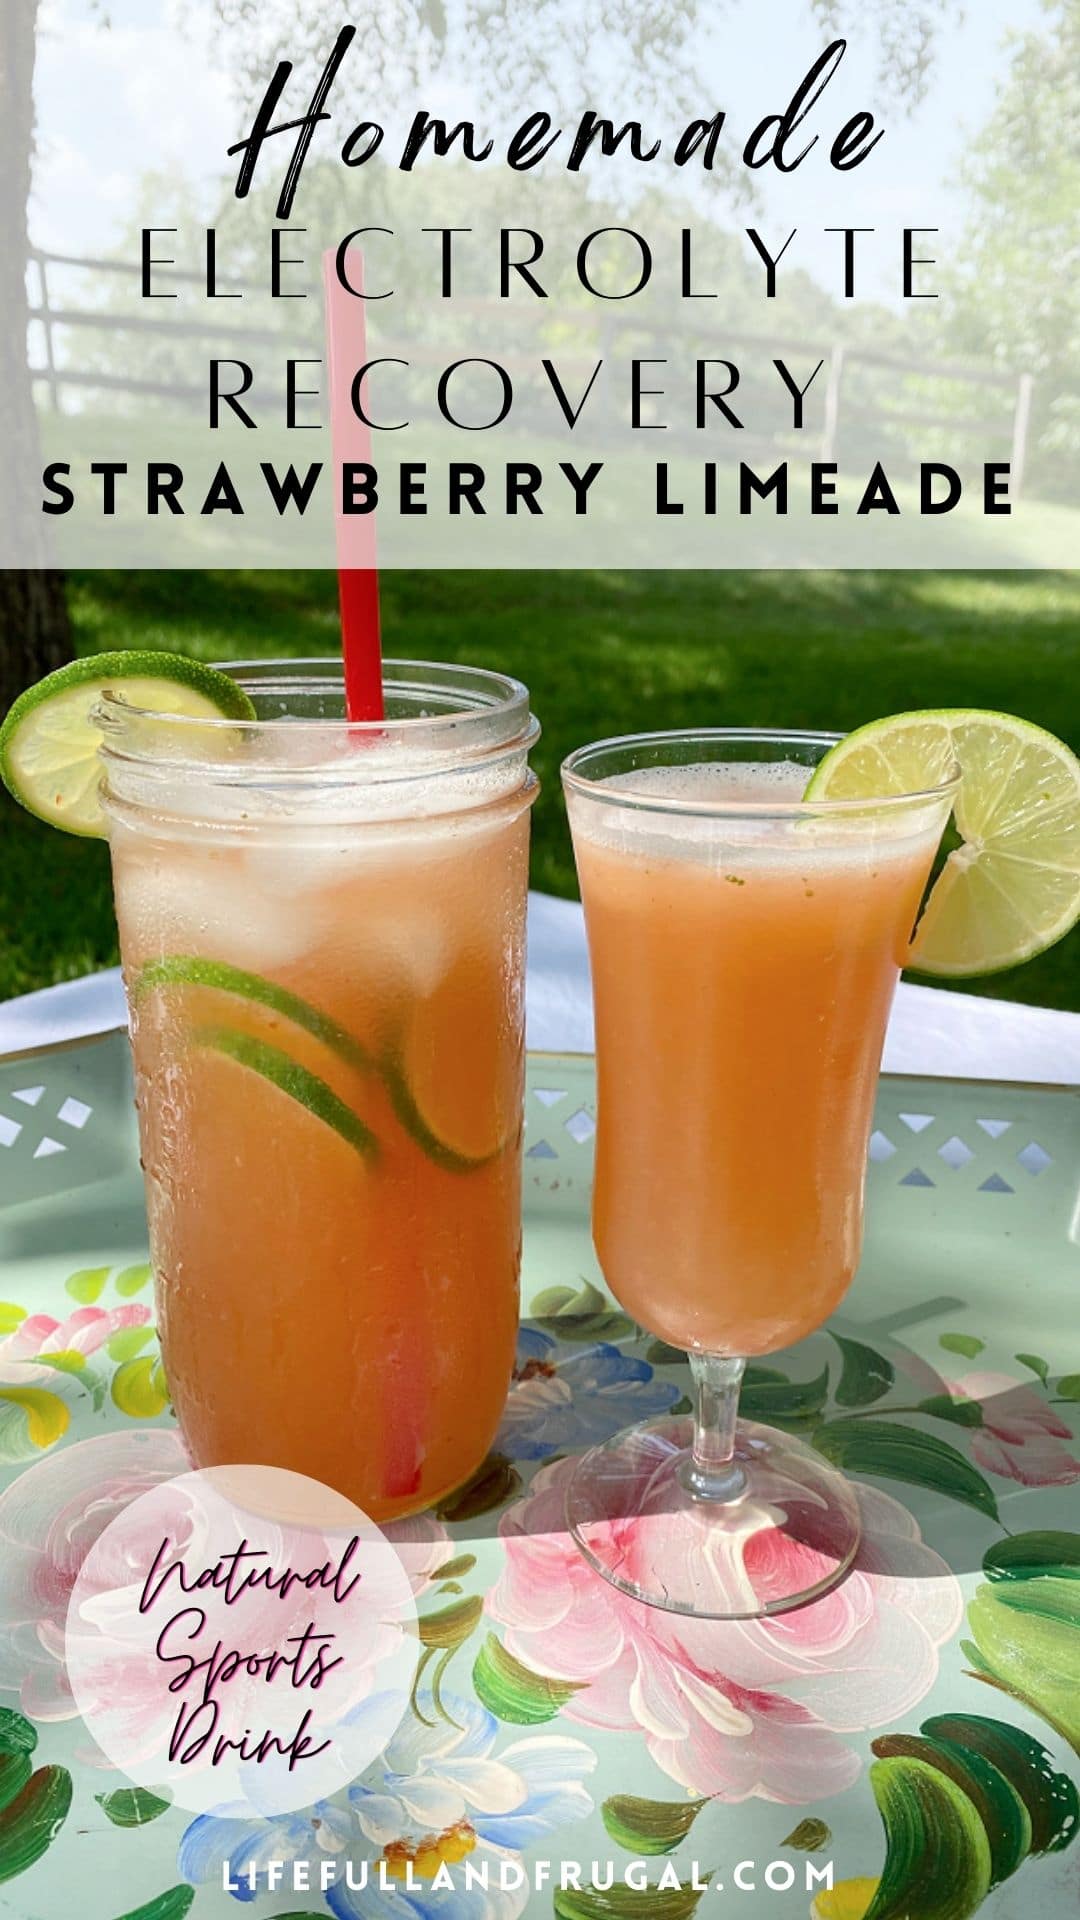 mason jar and a champagne flute with homemade strawberry limeade electrolyte recovery drink garnished with slices of lime sitting on a tray on a picnic table outside - Life Full and Frugal